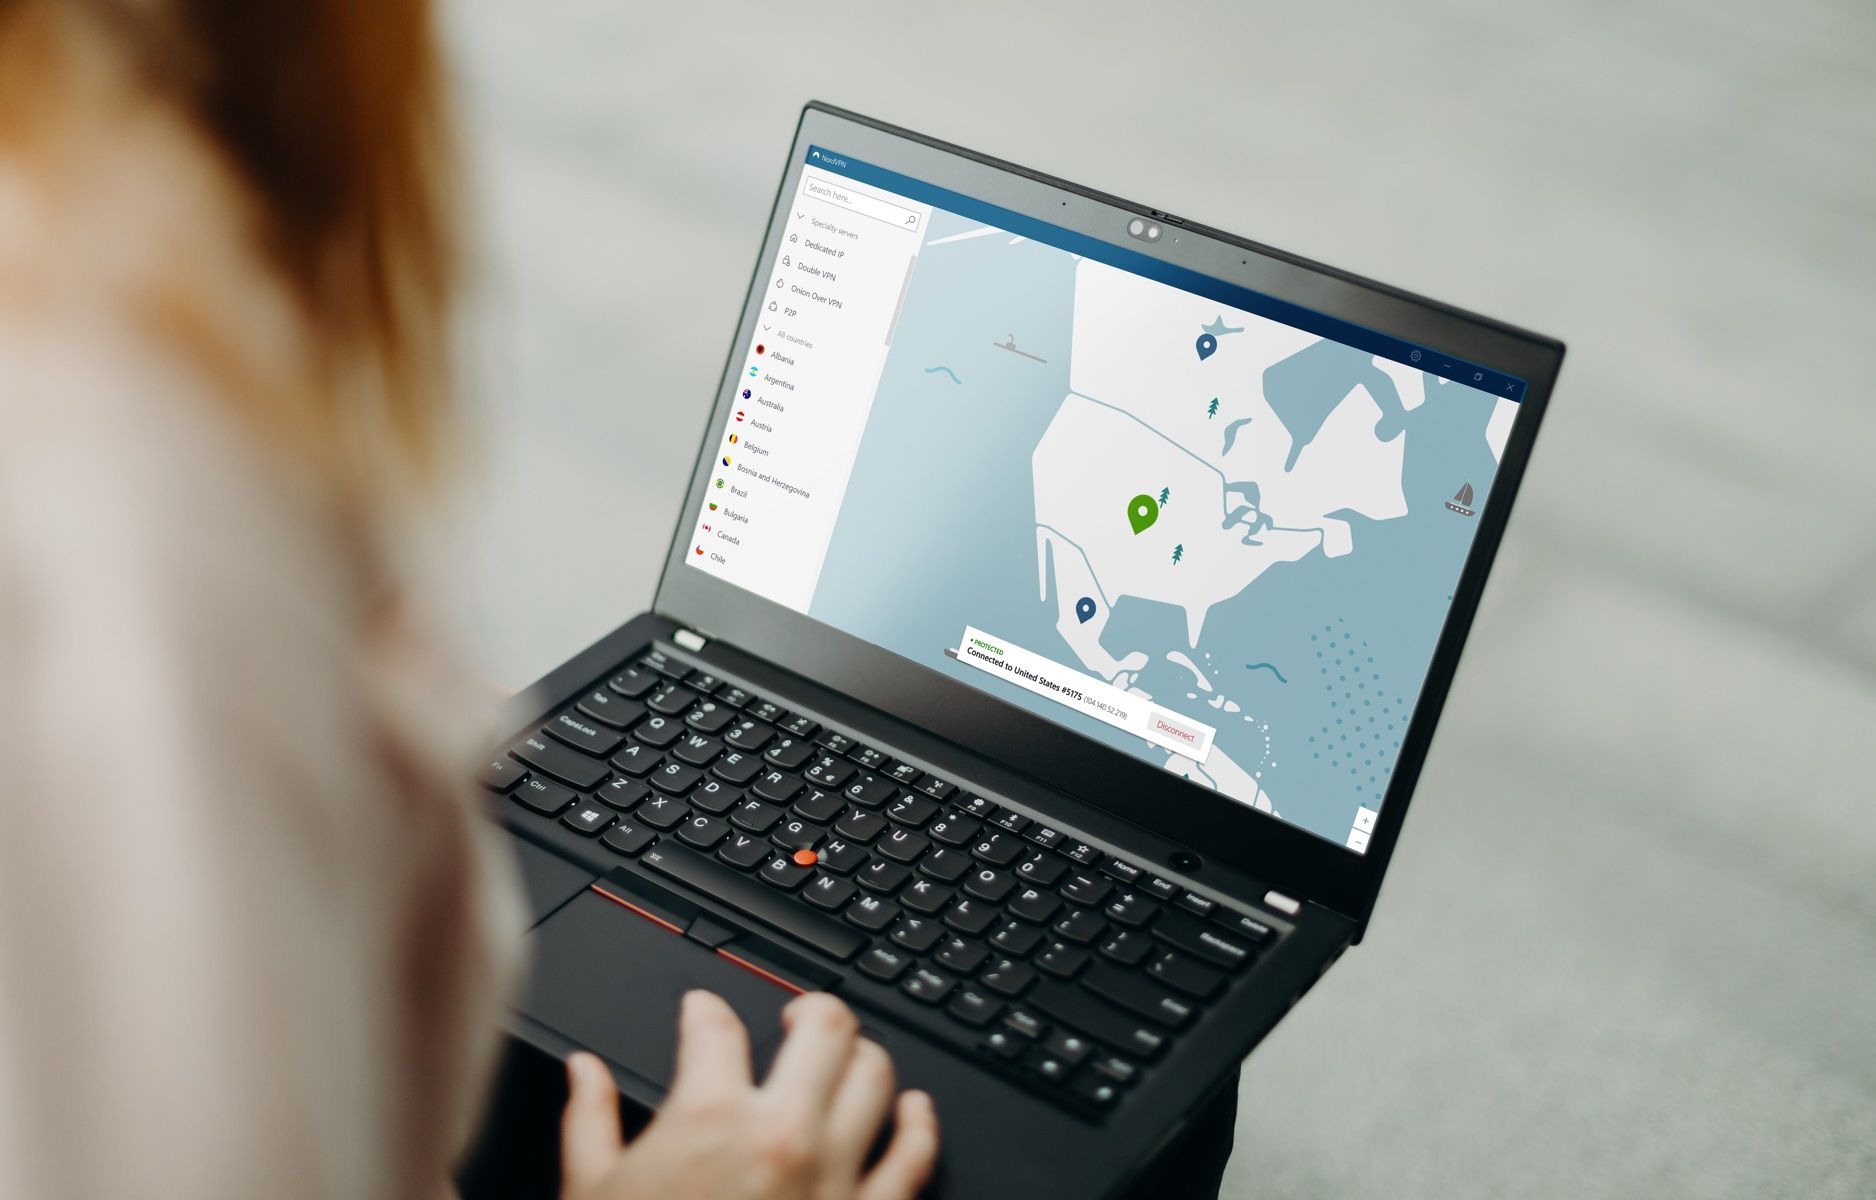 a person sits with a windows laptop and connects to a vpn server location in the usa